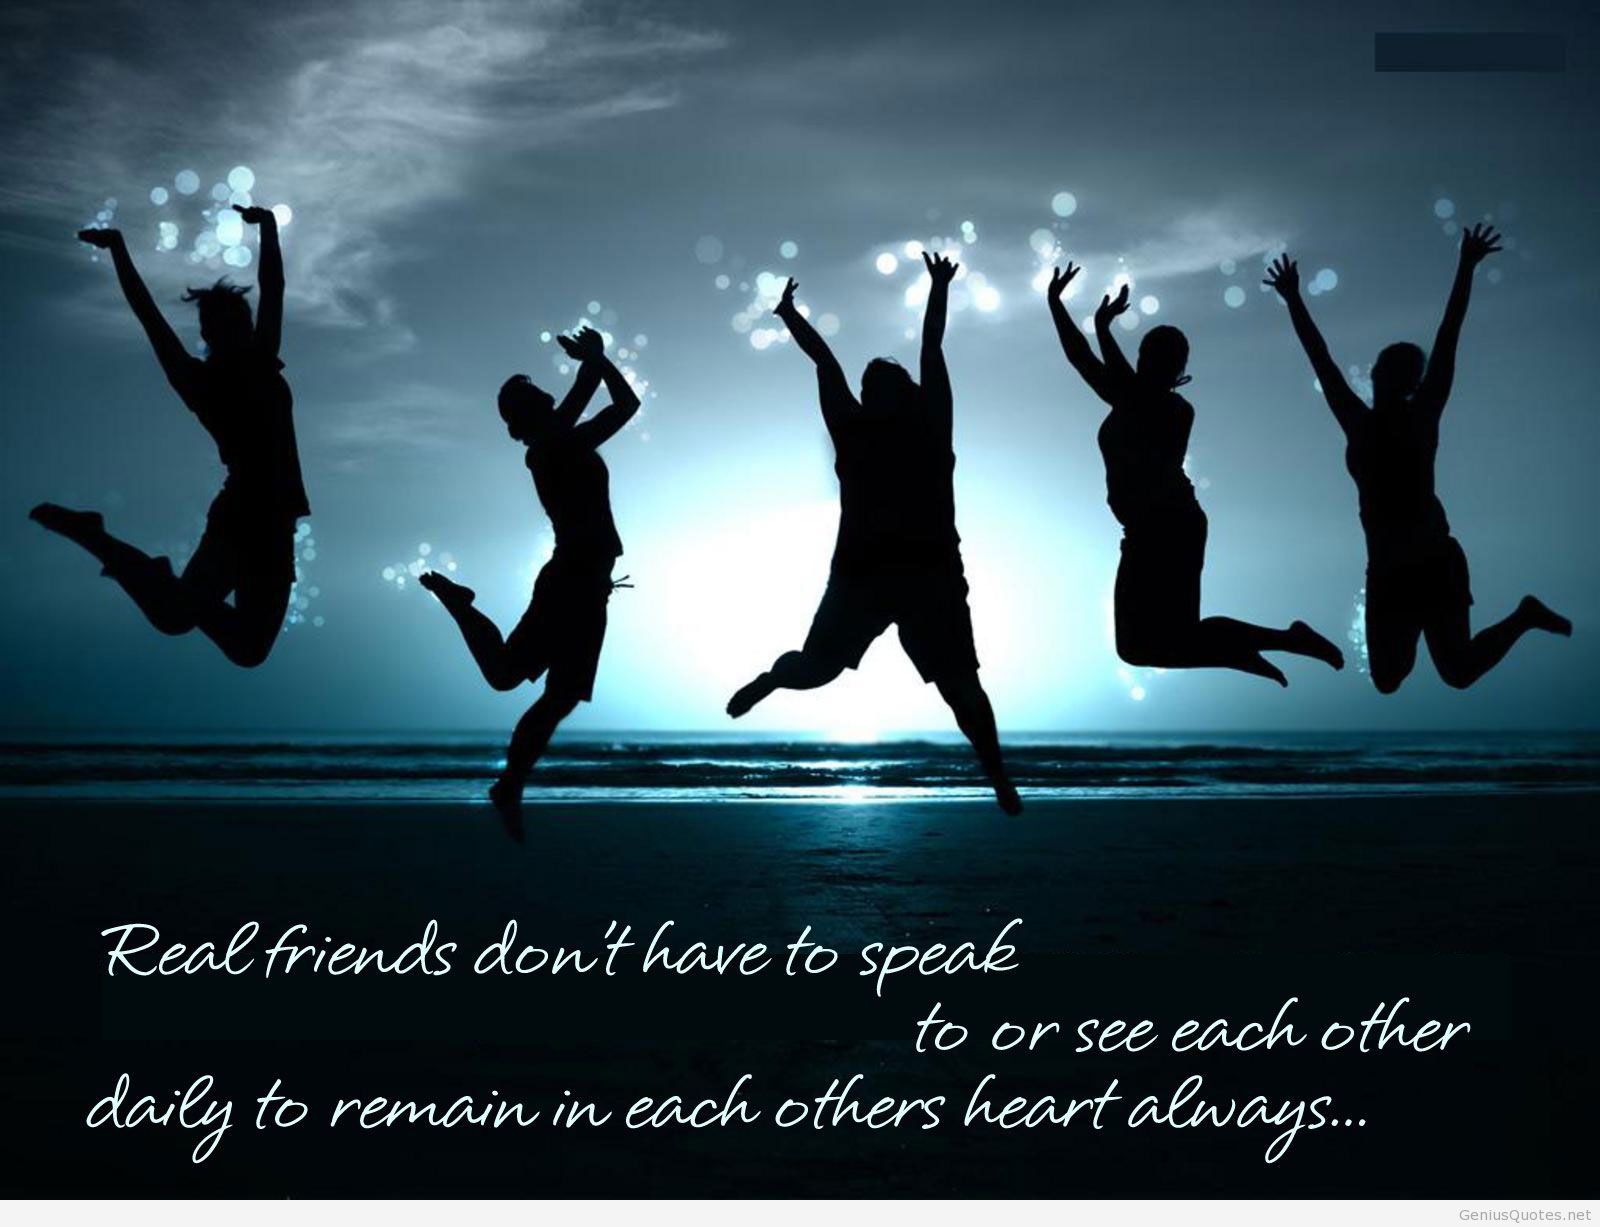 Friendship Day Vector Hd Images Friendship Day 2021 Friendship Day 2021  Png Friendship Day Images Hd PNG Image For Free Download